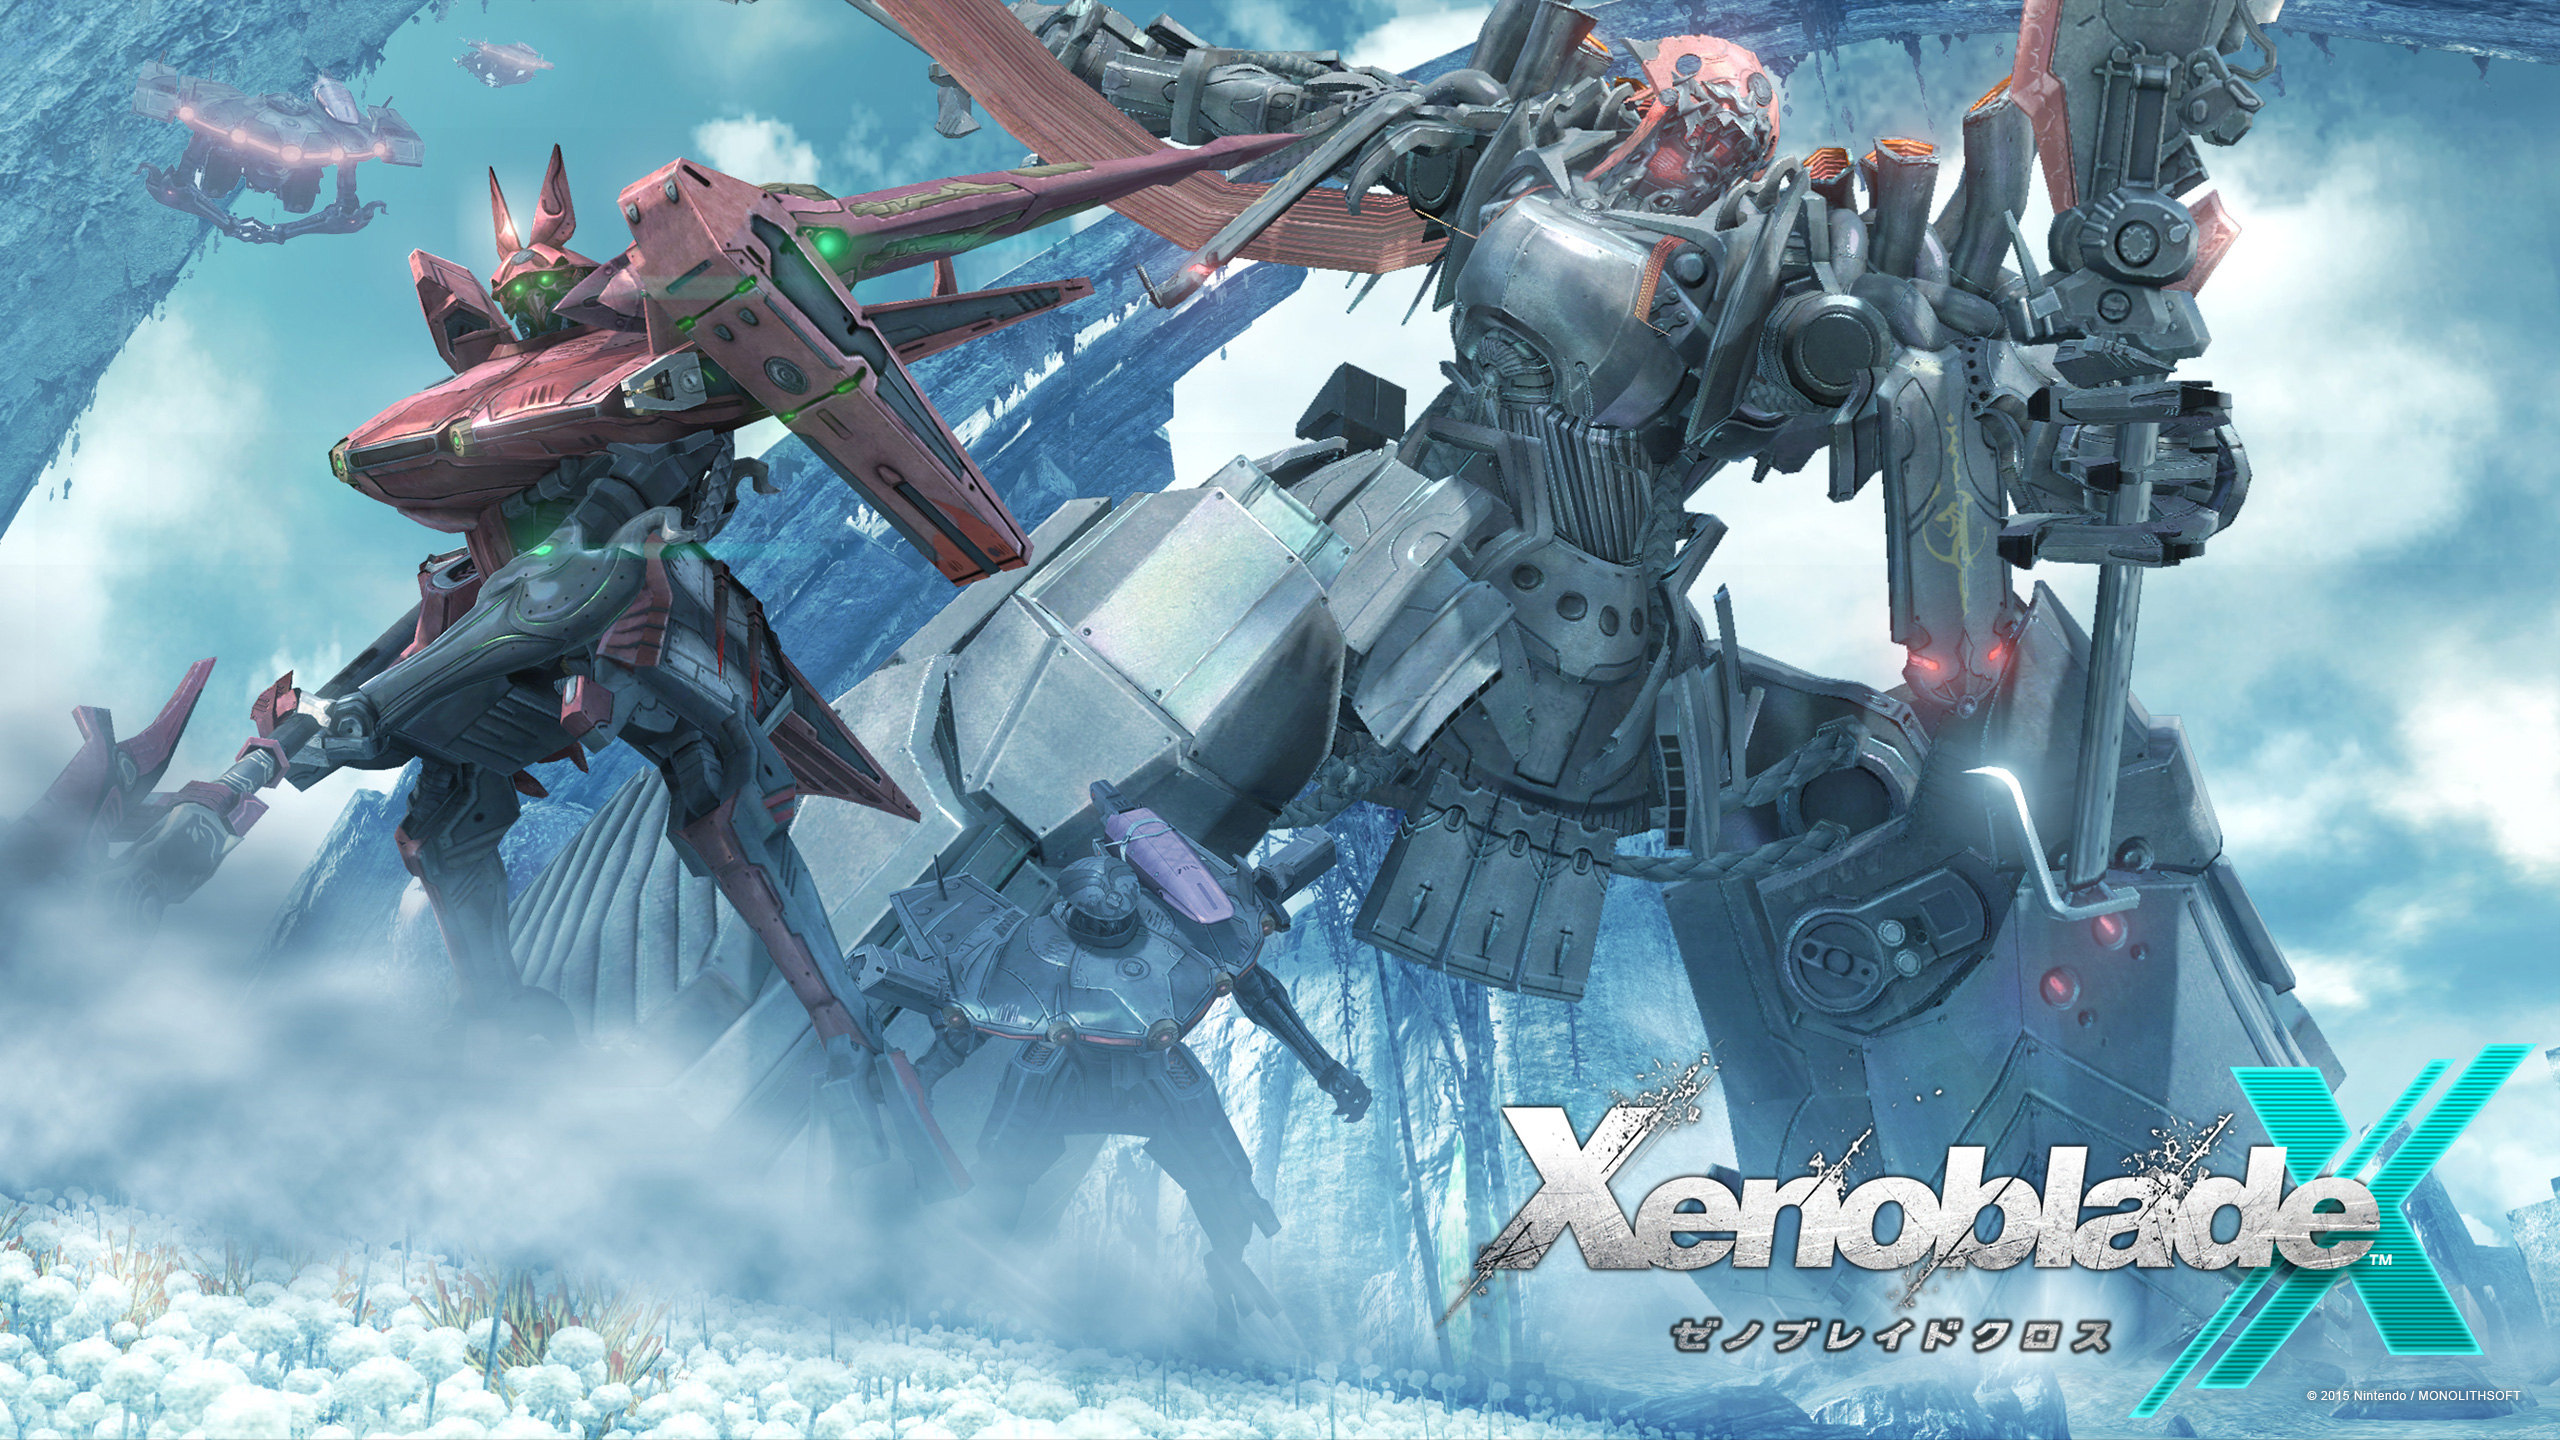 Xenoblade Chronicles X Backgrounds, Compatible - PC, Mobile, Gadgets| 2560x1440 px